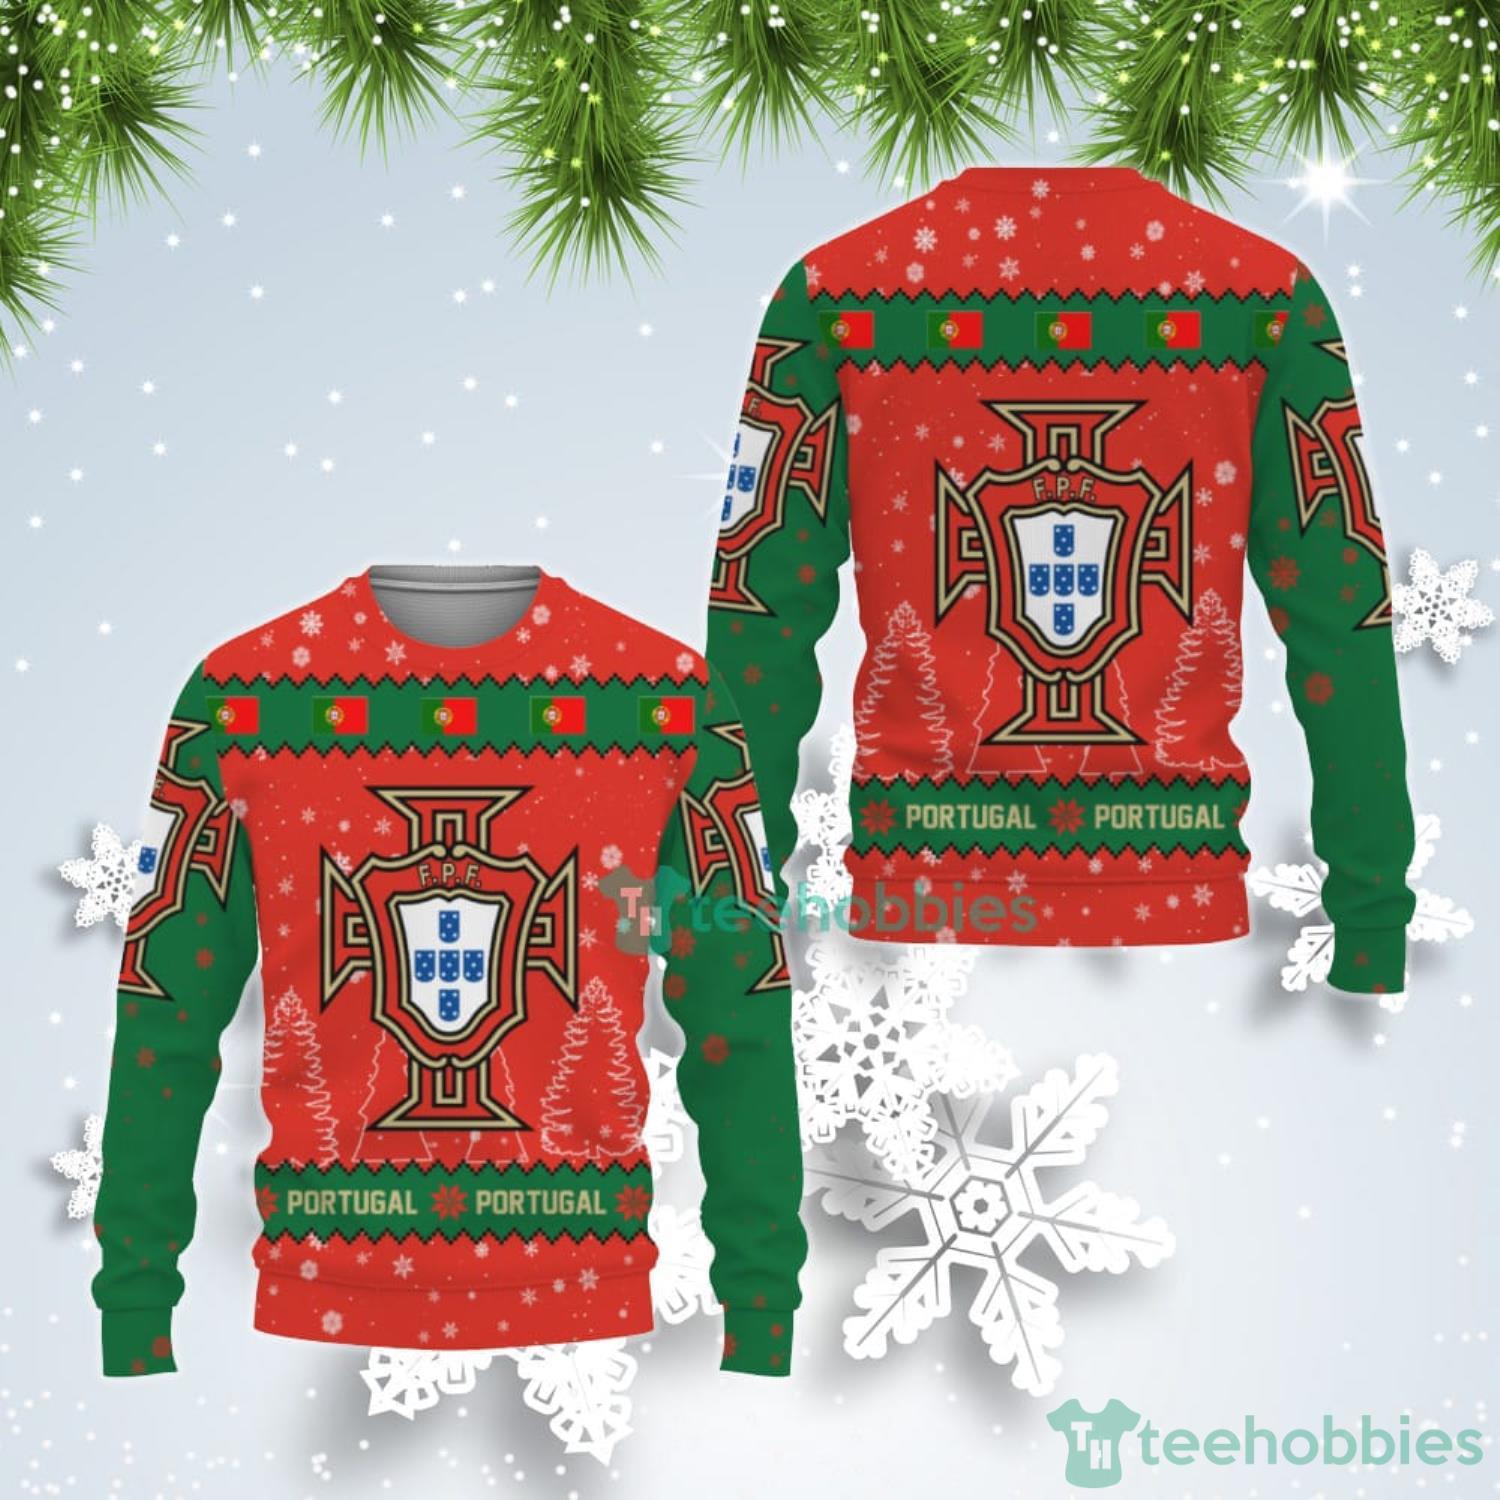 Portugal National Soccer Team Qatar World Cup 2022 Winter Season Ugly Christmas Sweater Product Photo 1